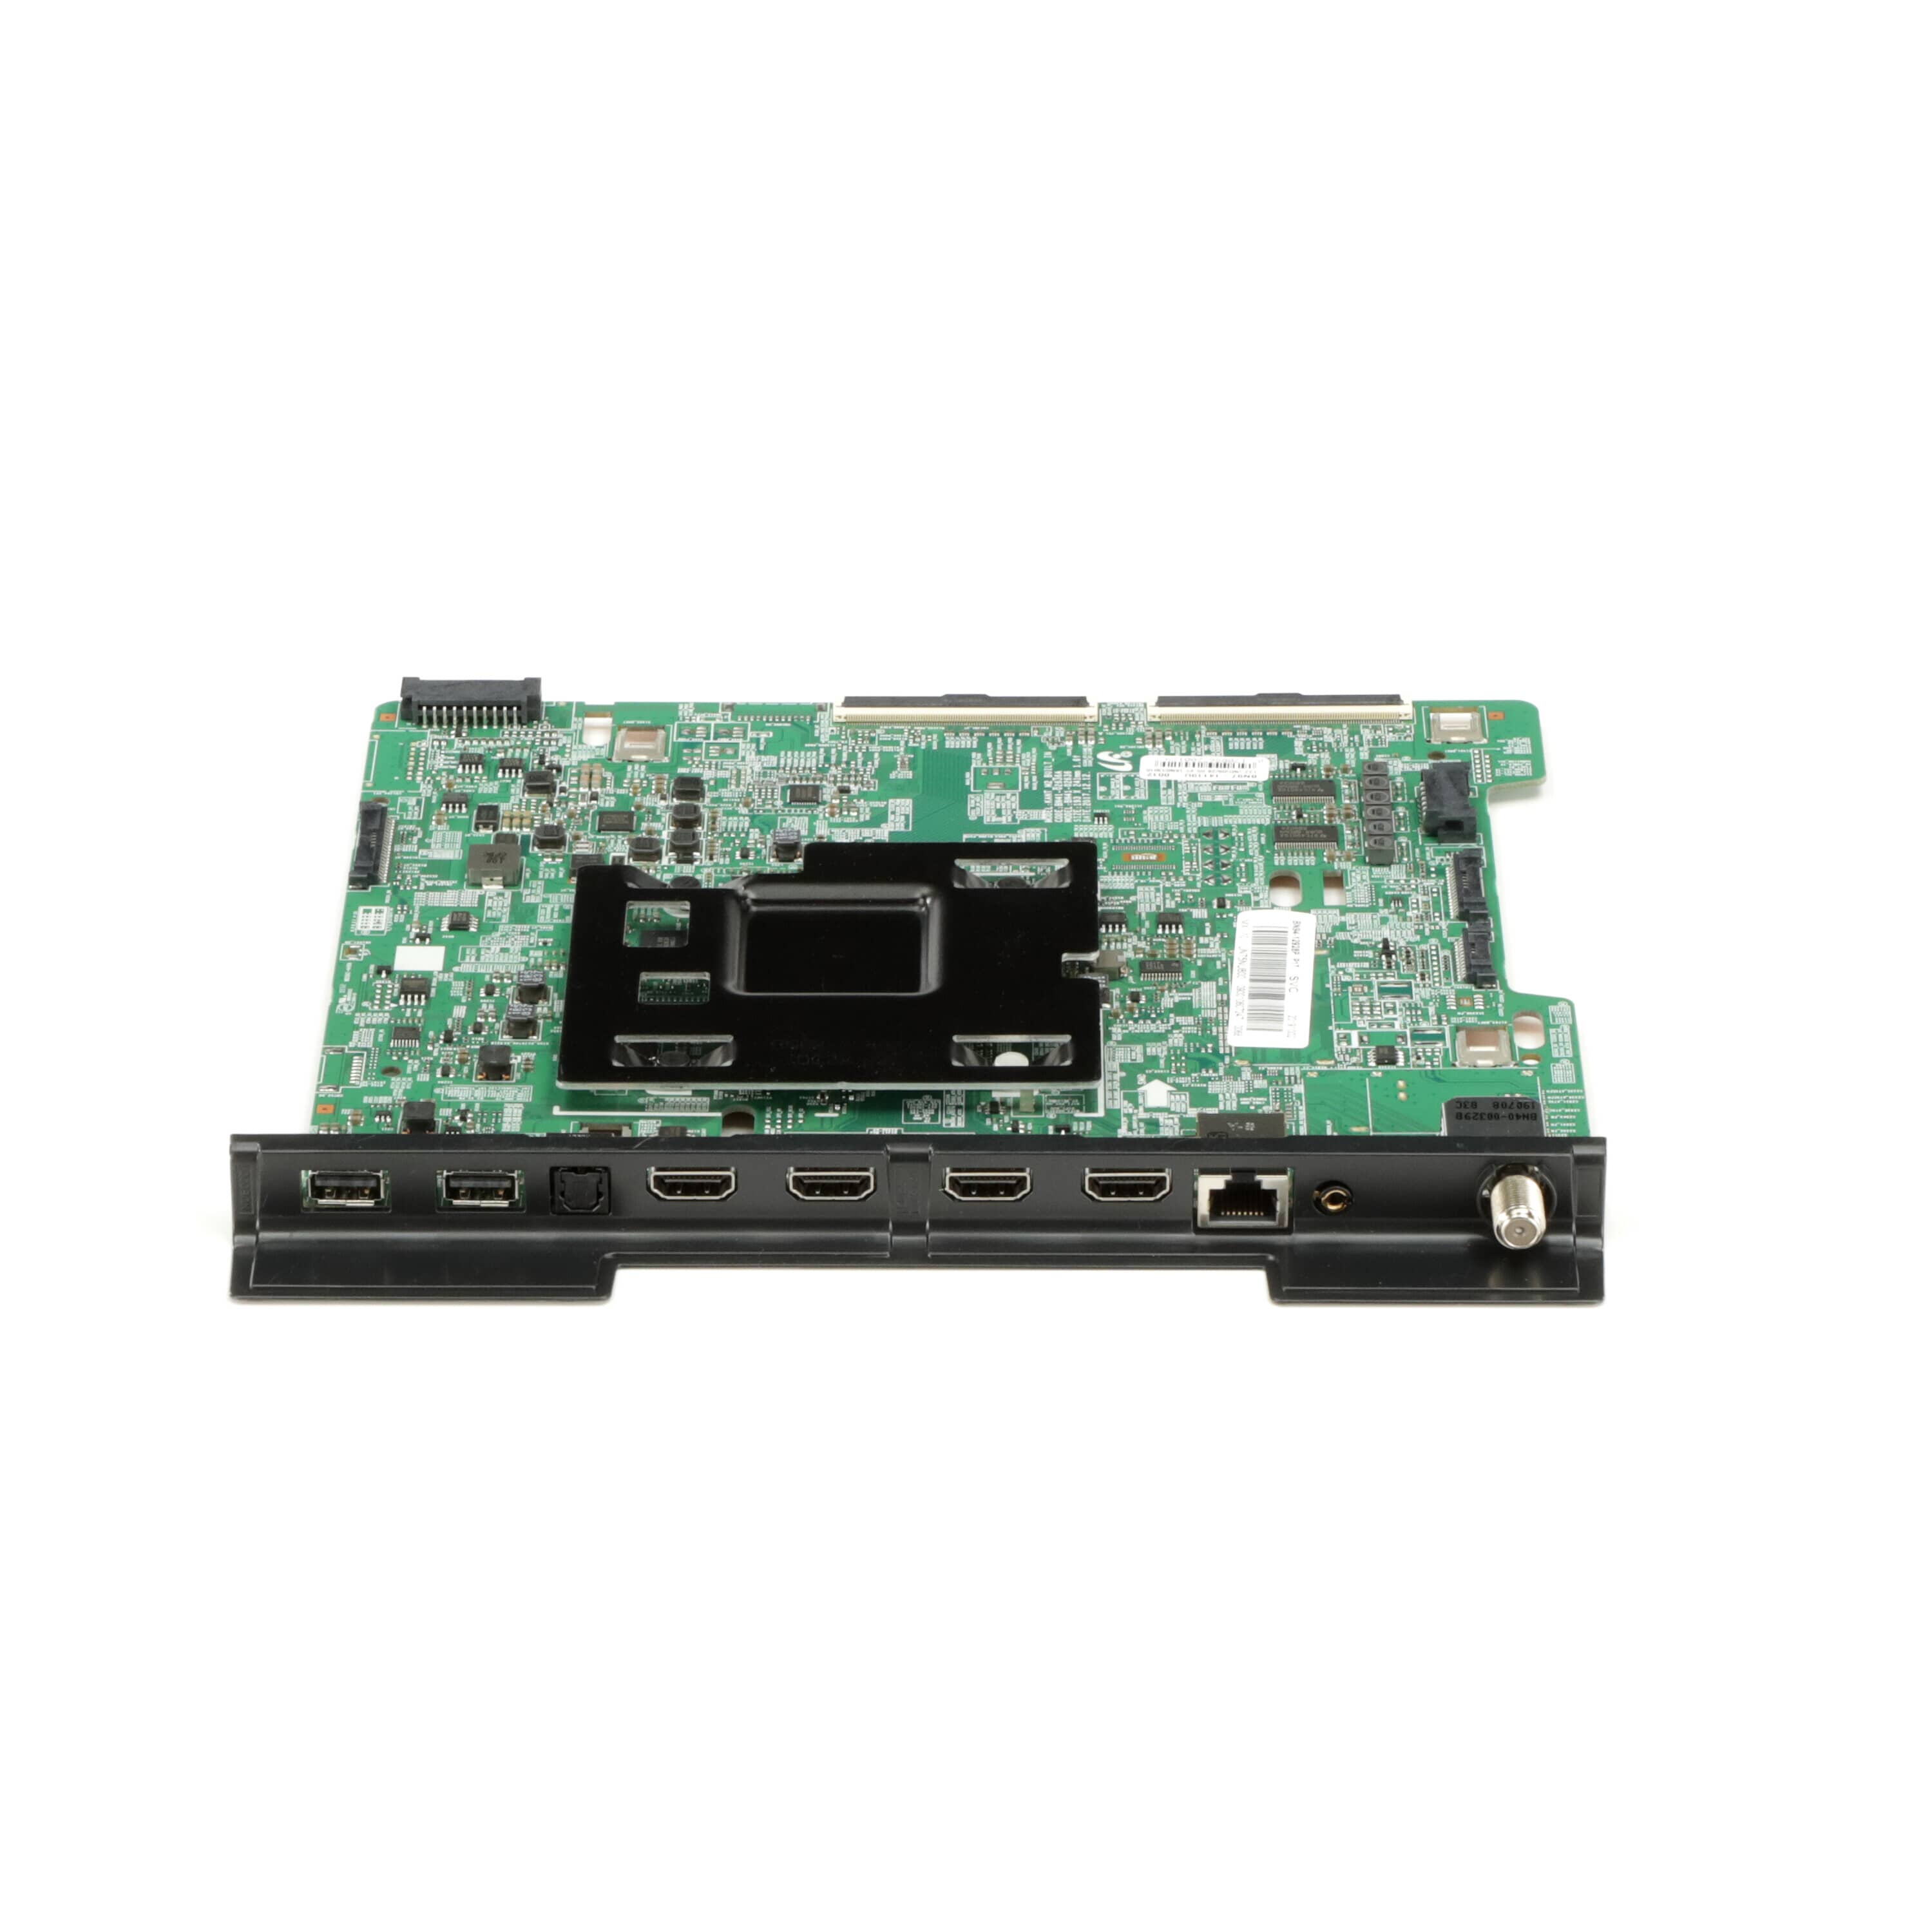 Samsung BN94-12928P Television Electronic Control Board